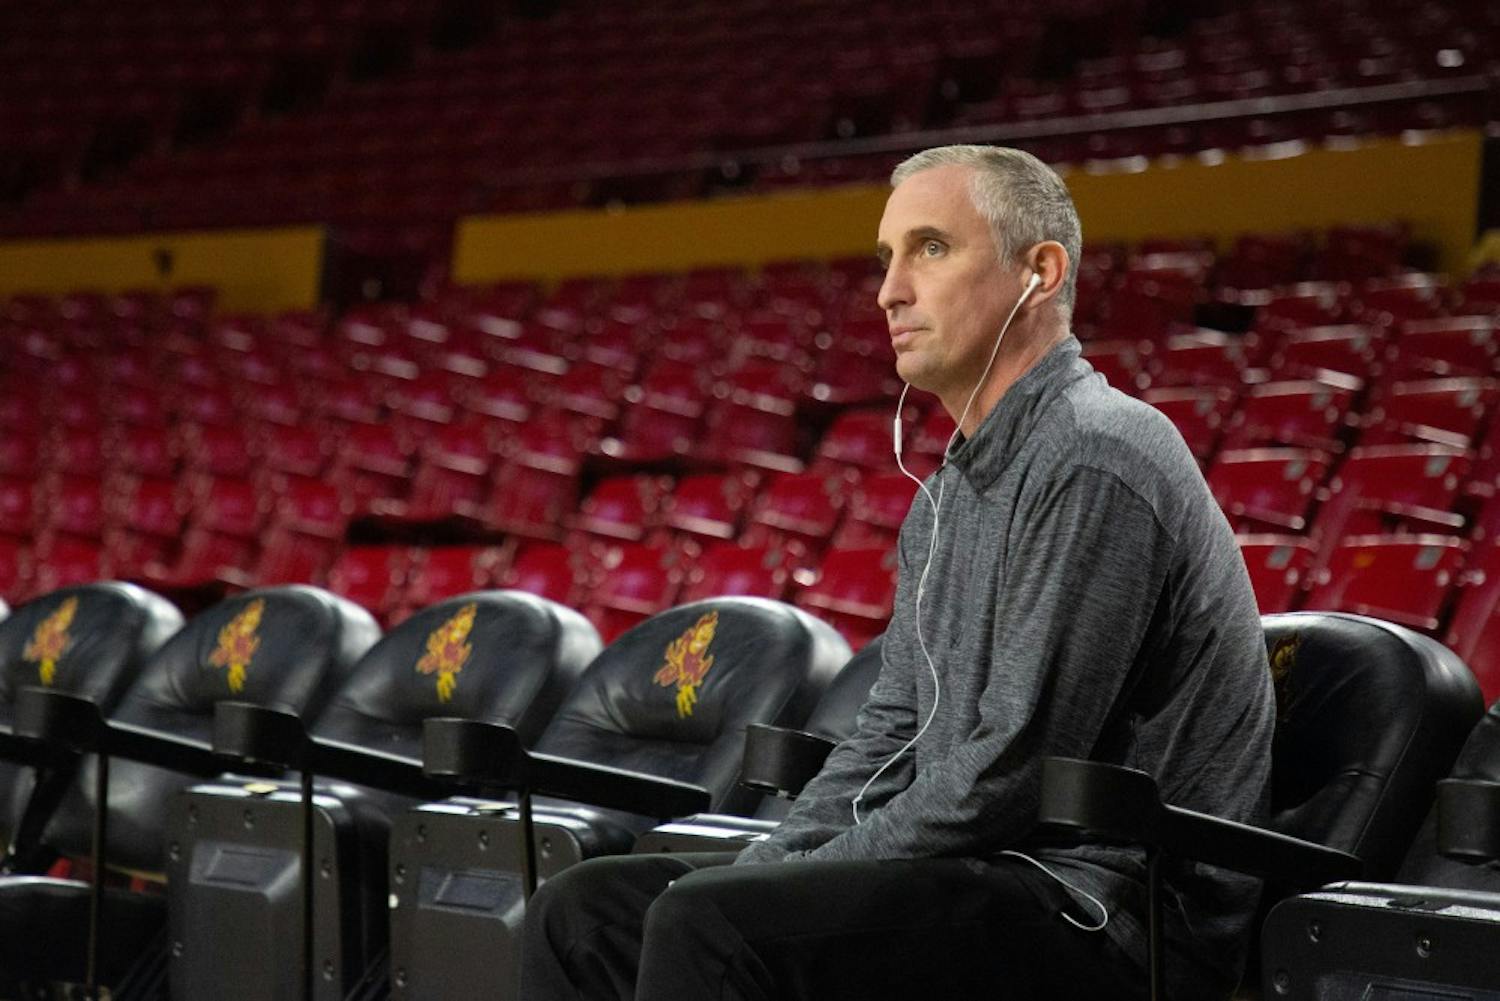 Bobby Hurley watches opponents